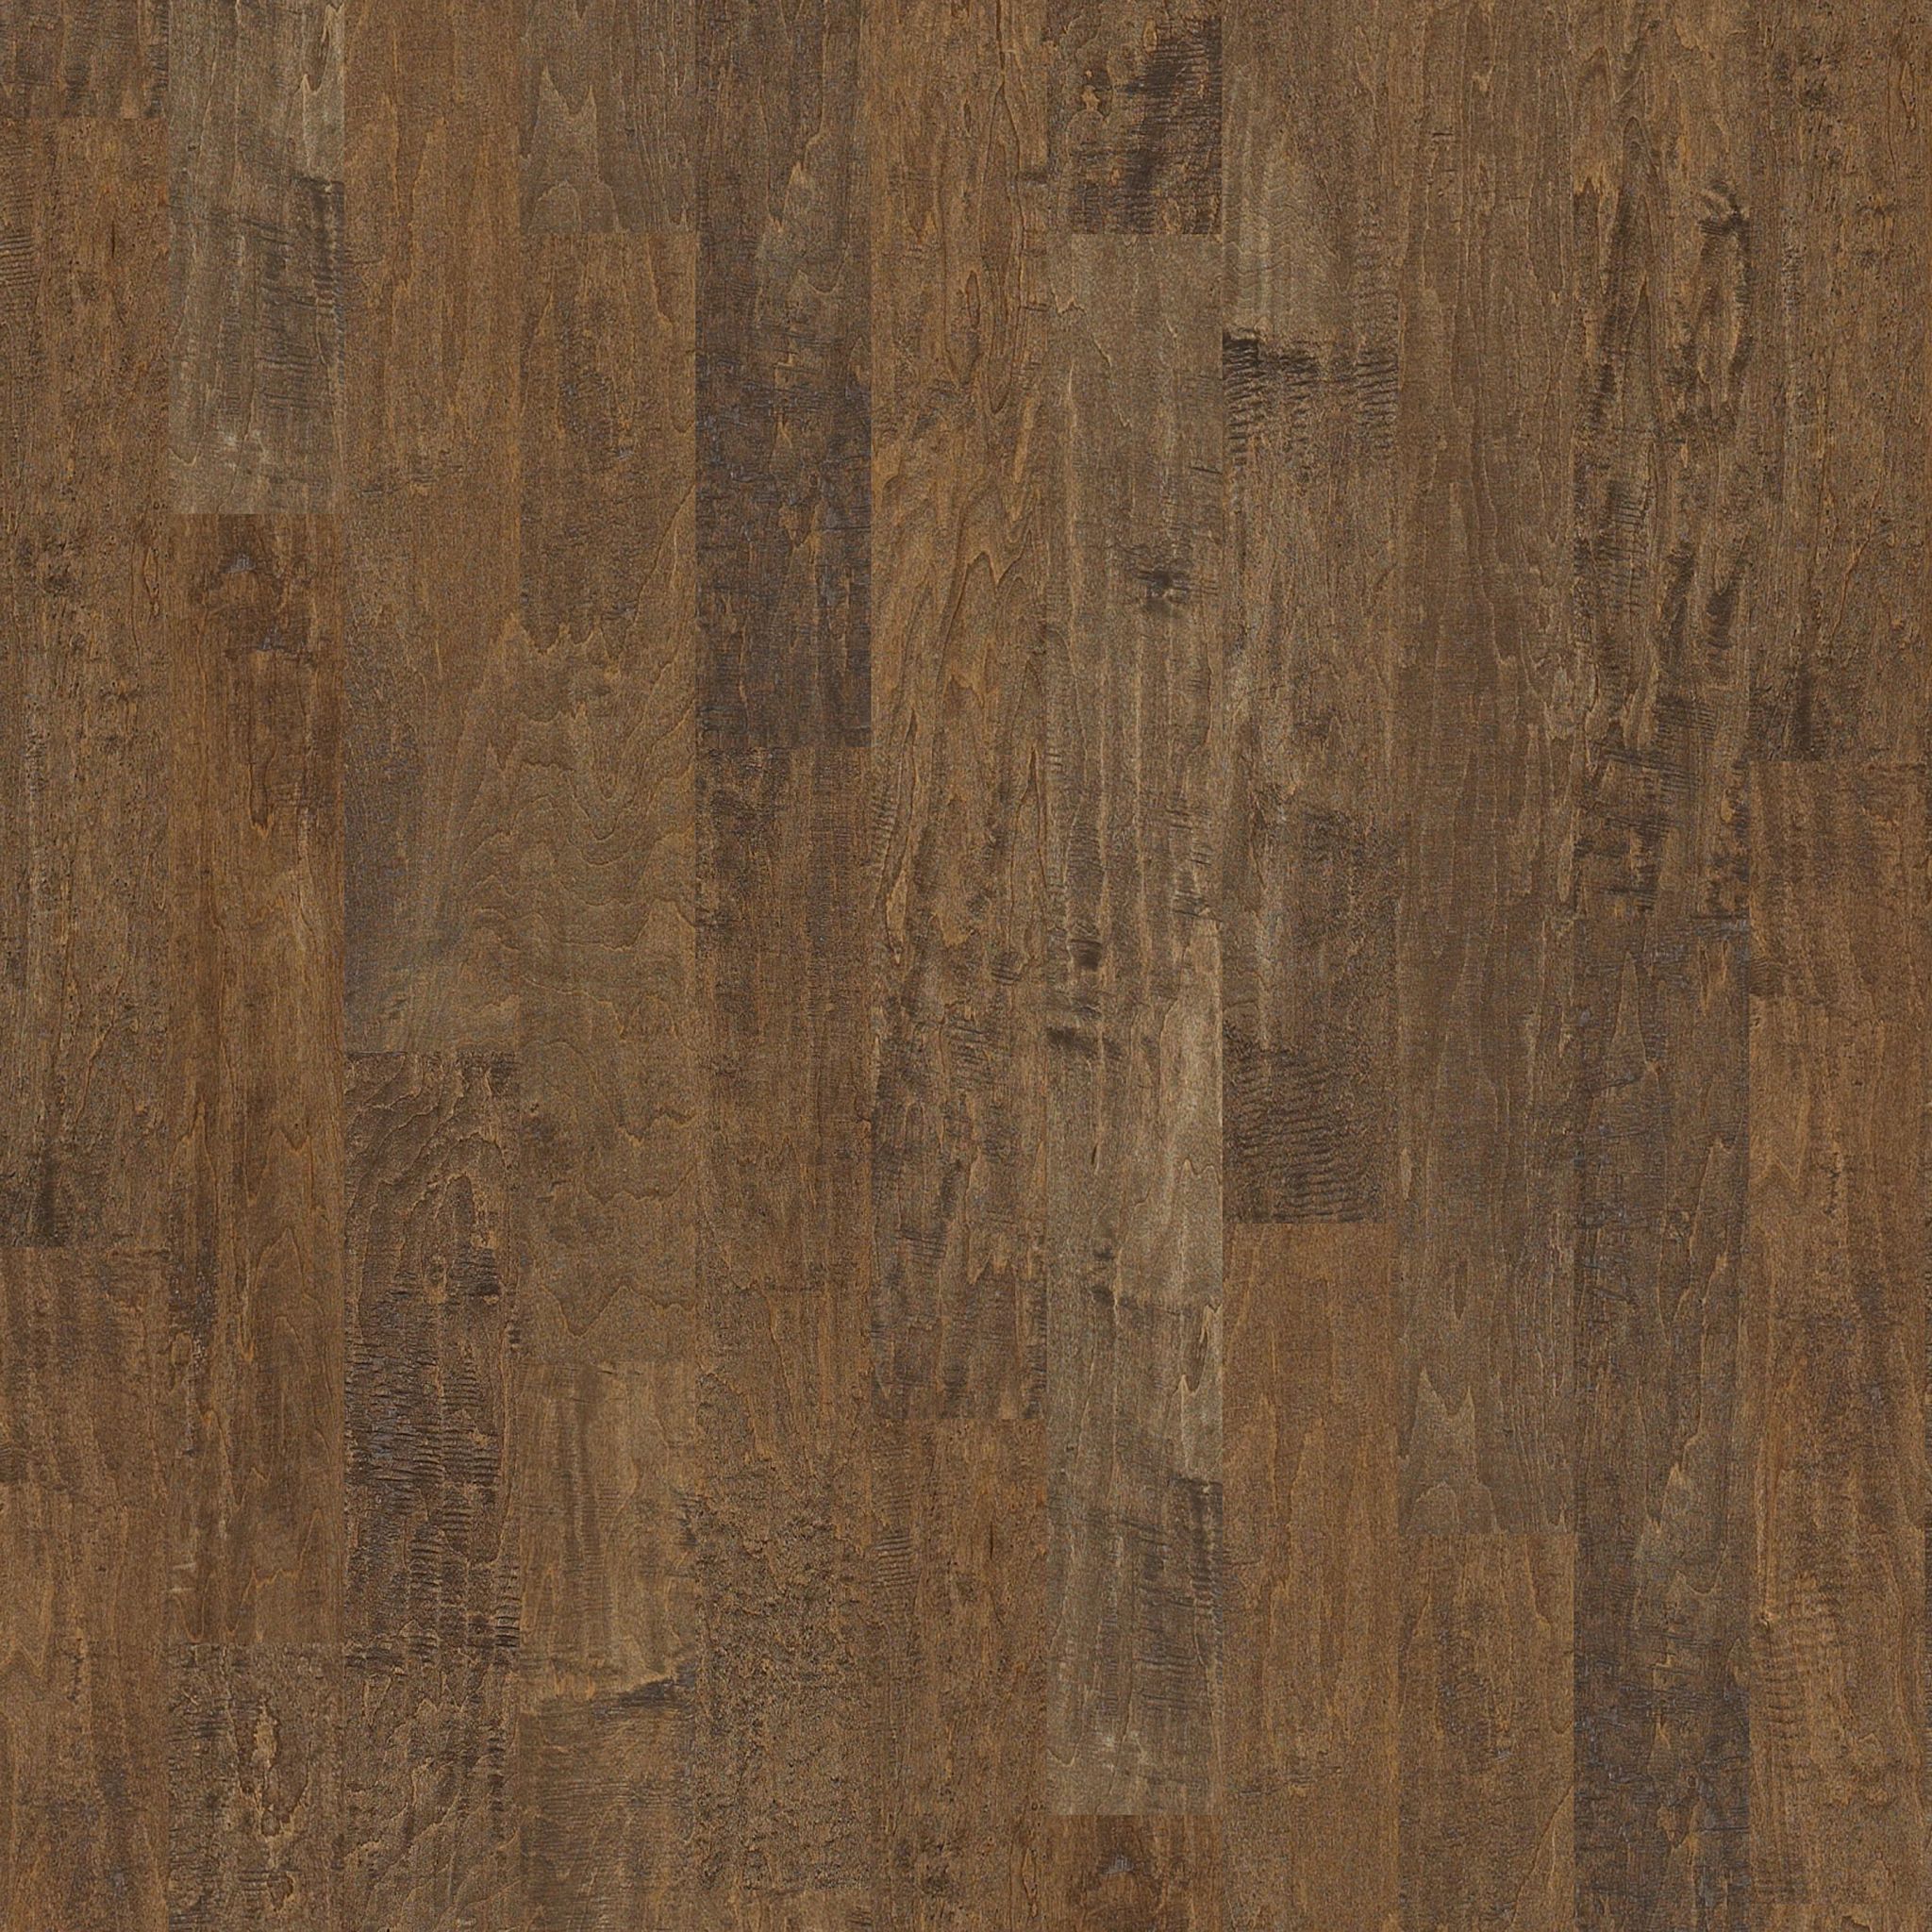 Style name and number: Yukon Maple 6 3/8″ SW548 and color name and number: Bison 03000